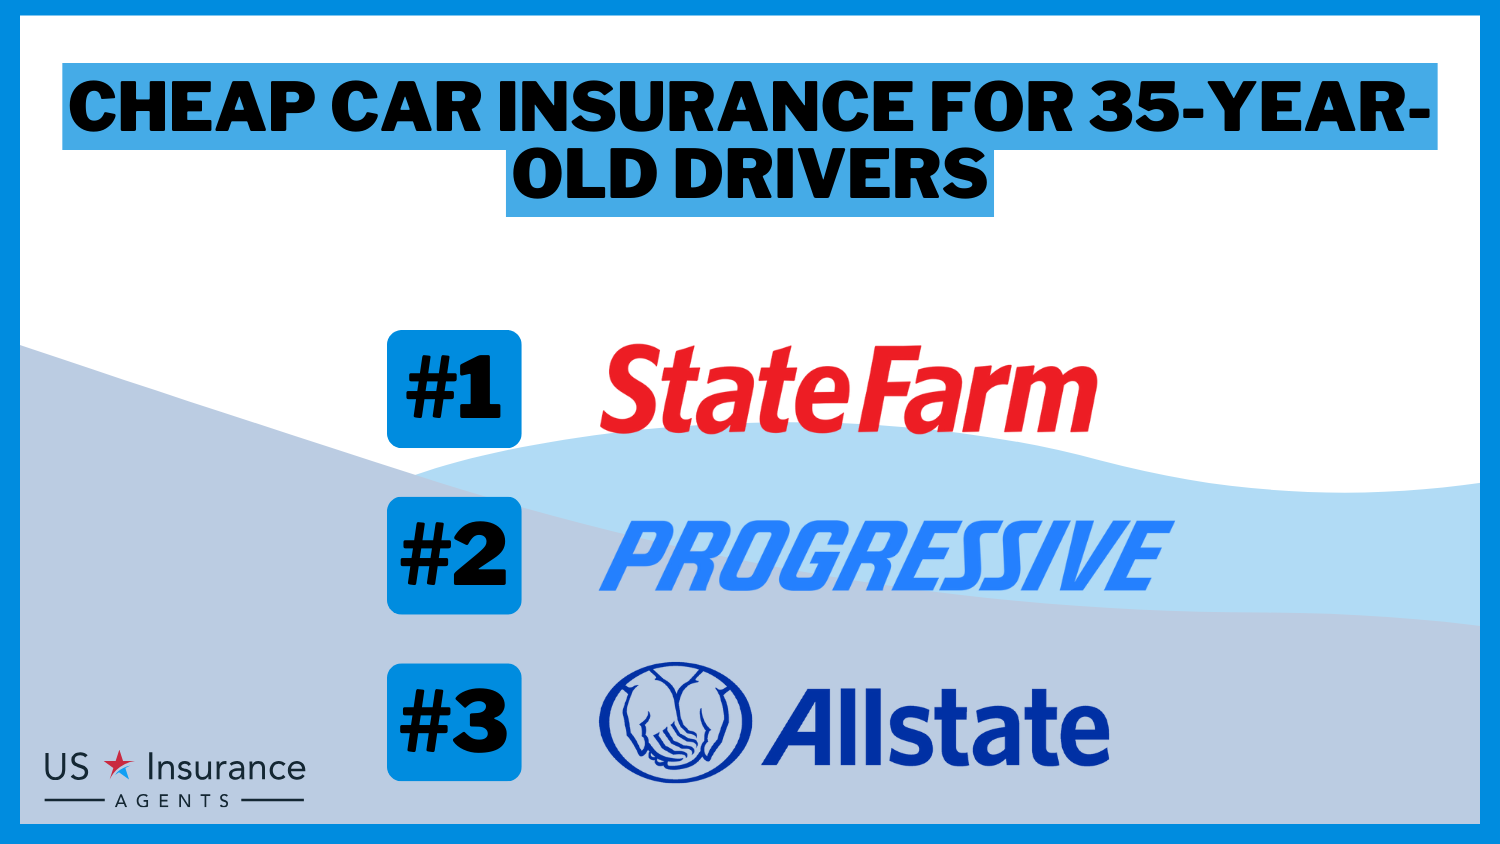 Cheap Car Insurance for 35-Year-Old Drivers: State Farm, Progressive, and Allstate